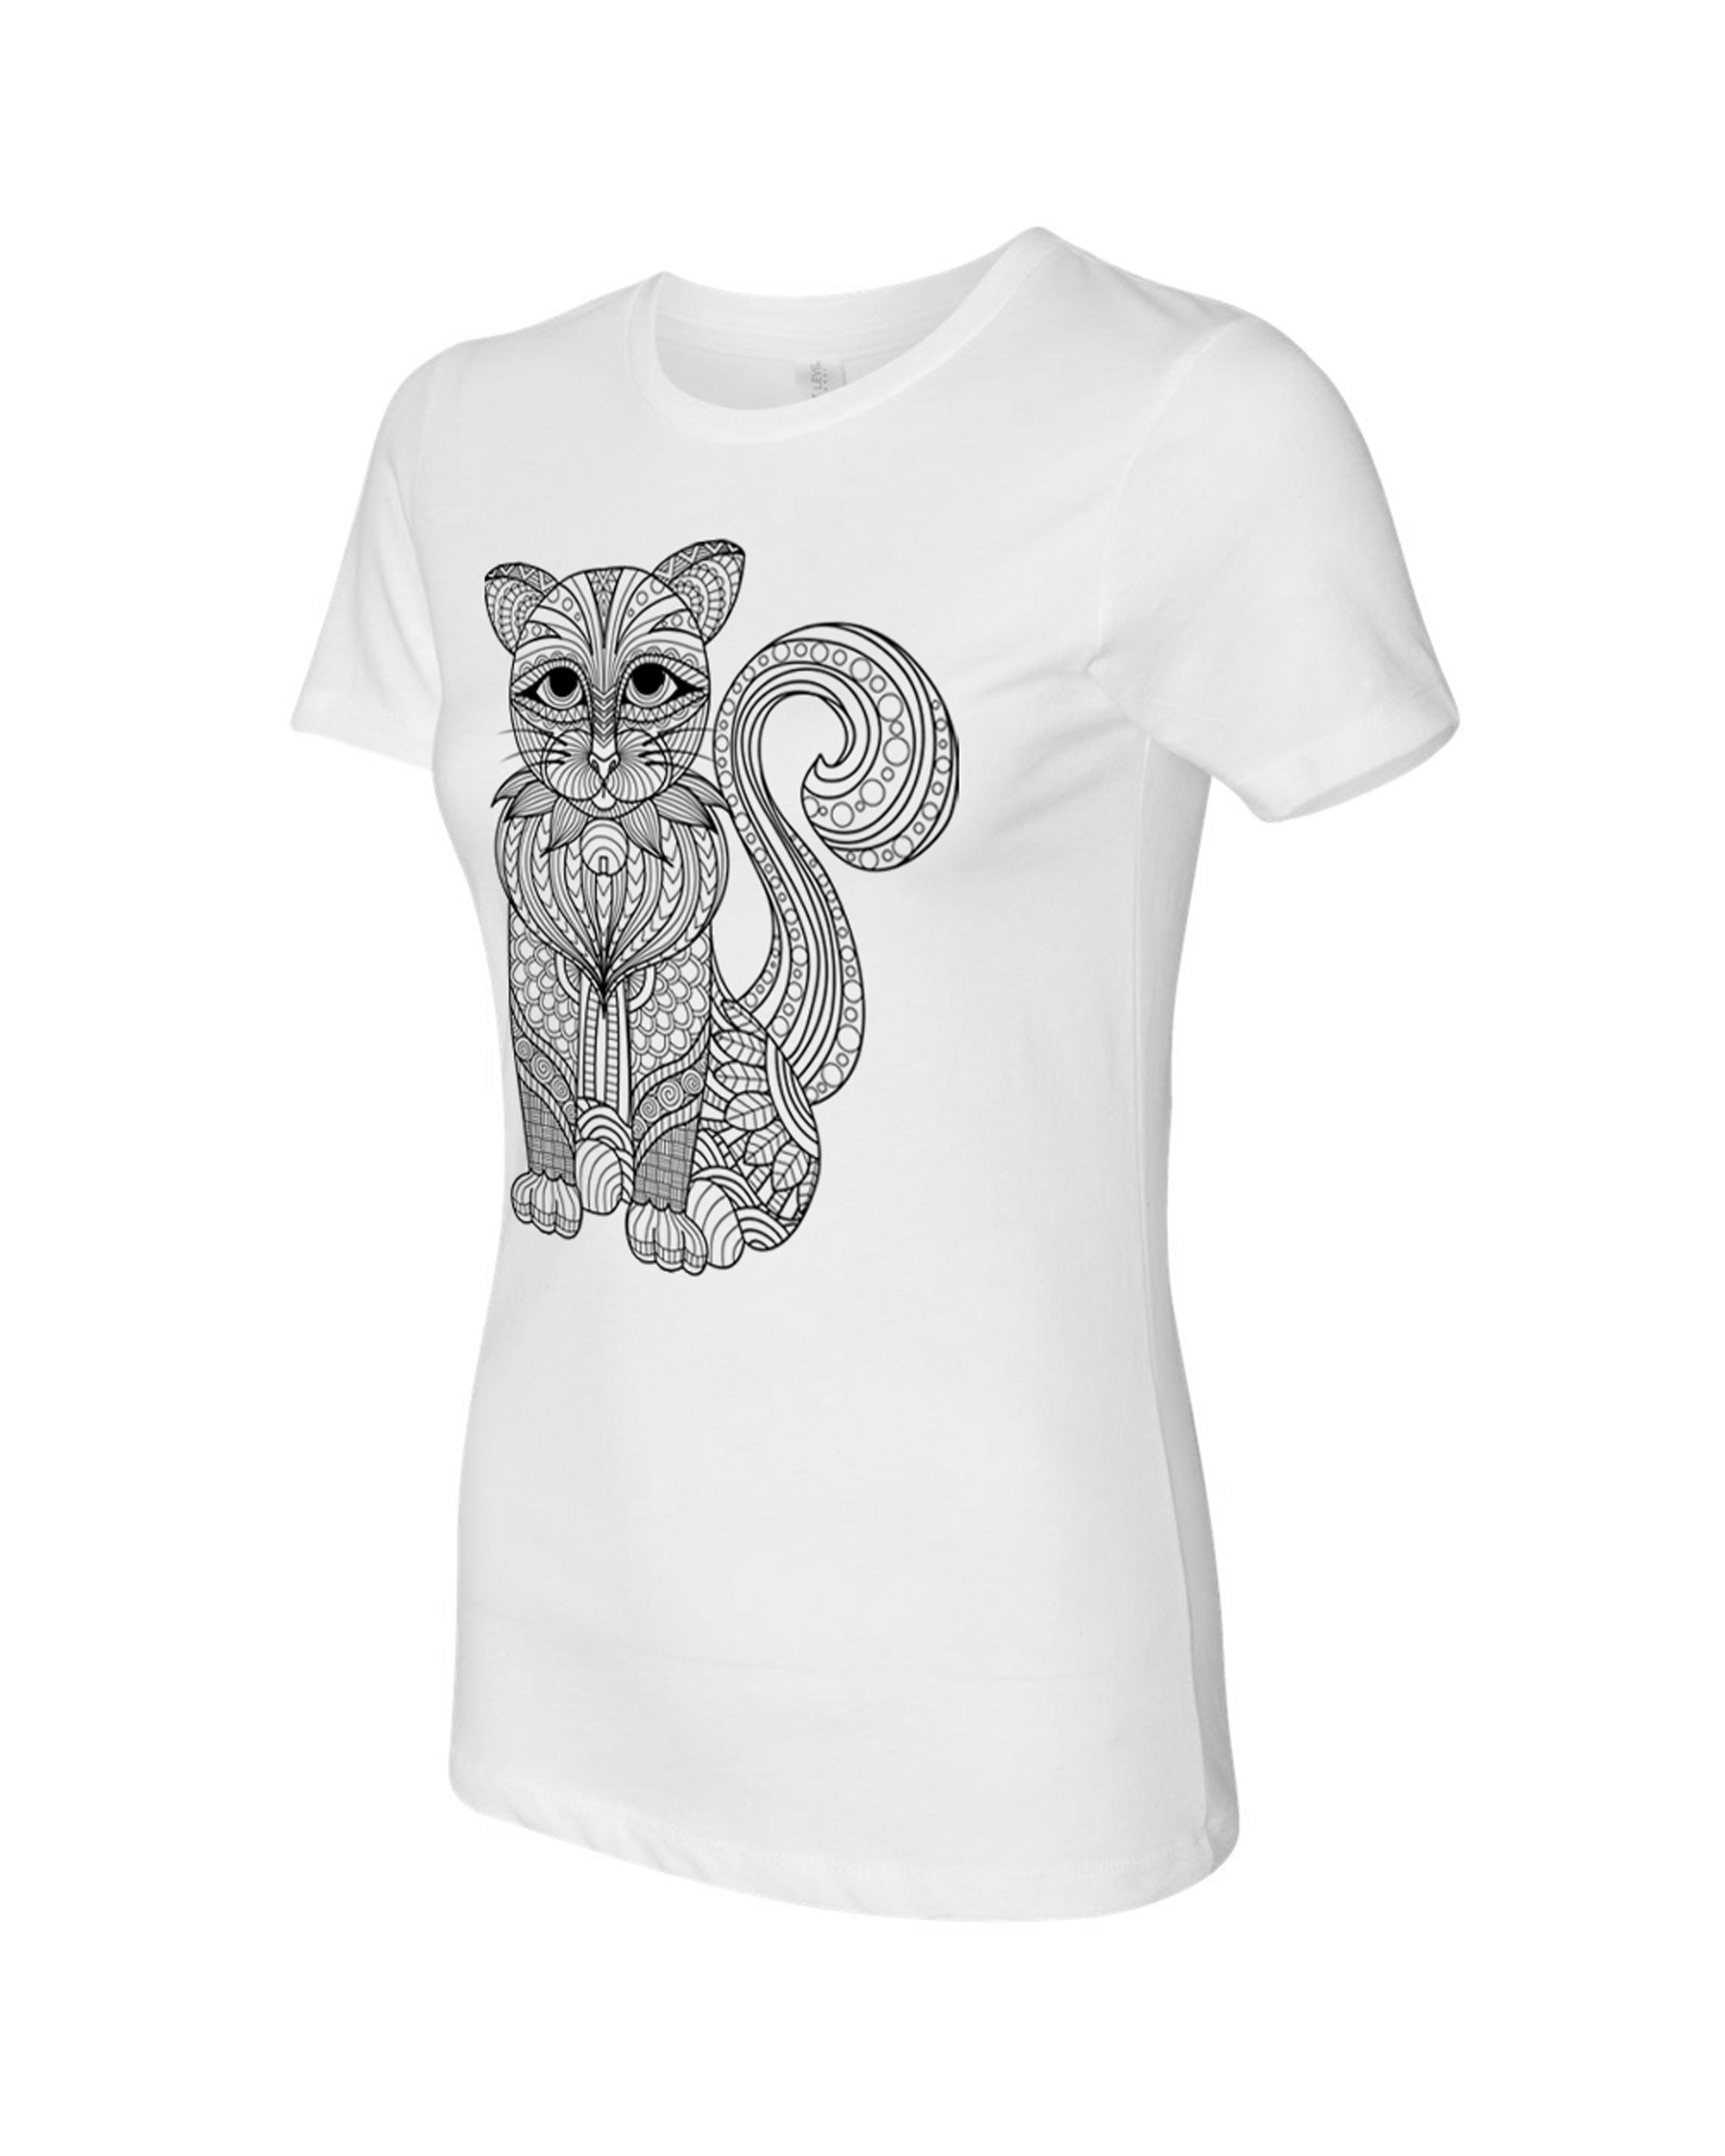 Cat Coloring Women's Tee - Adorned By You